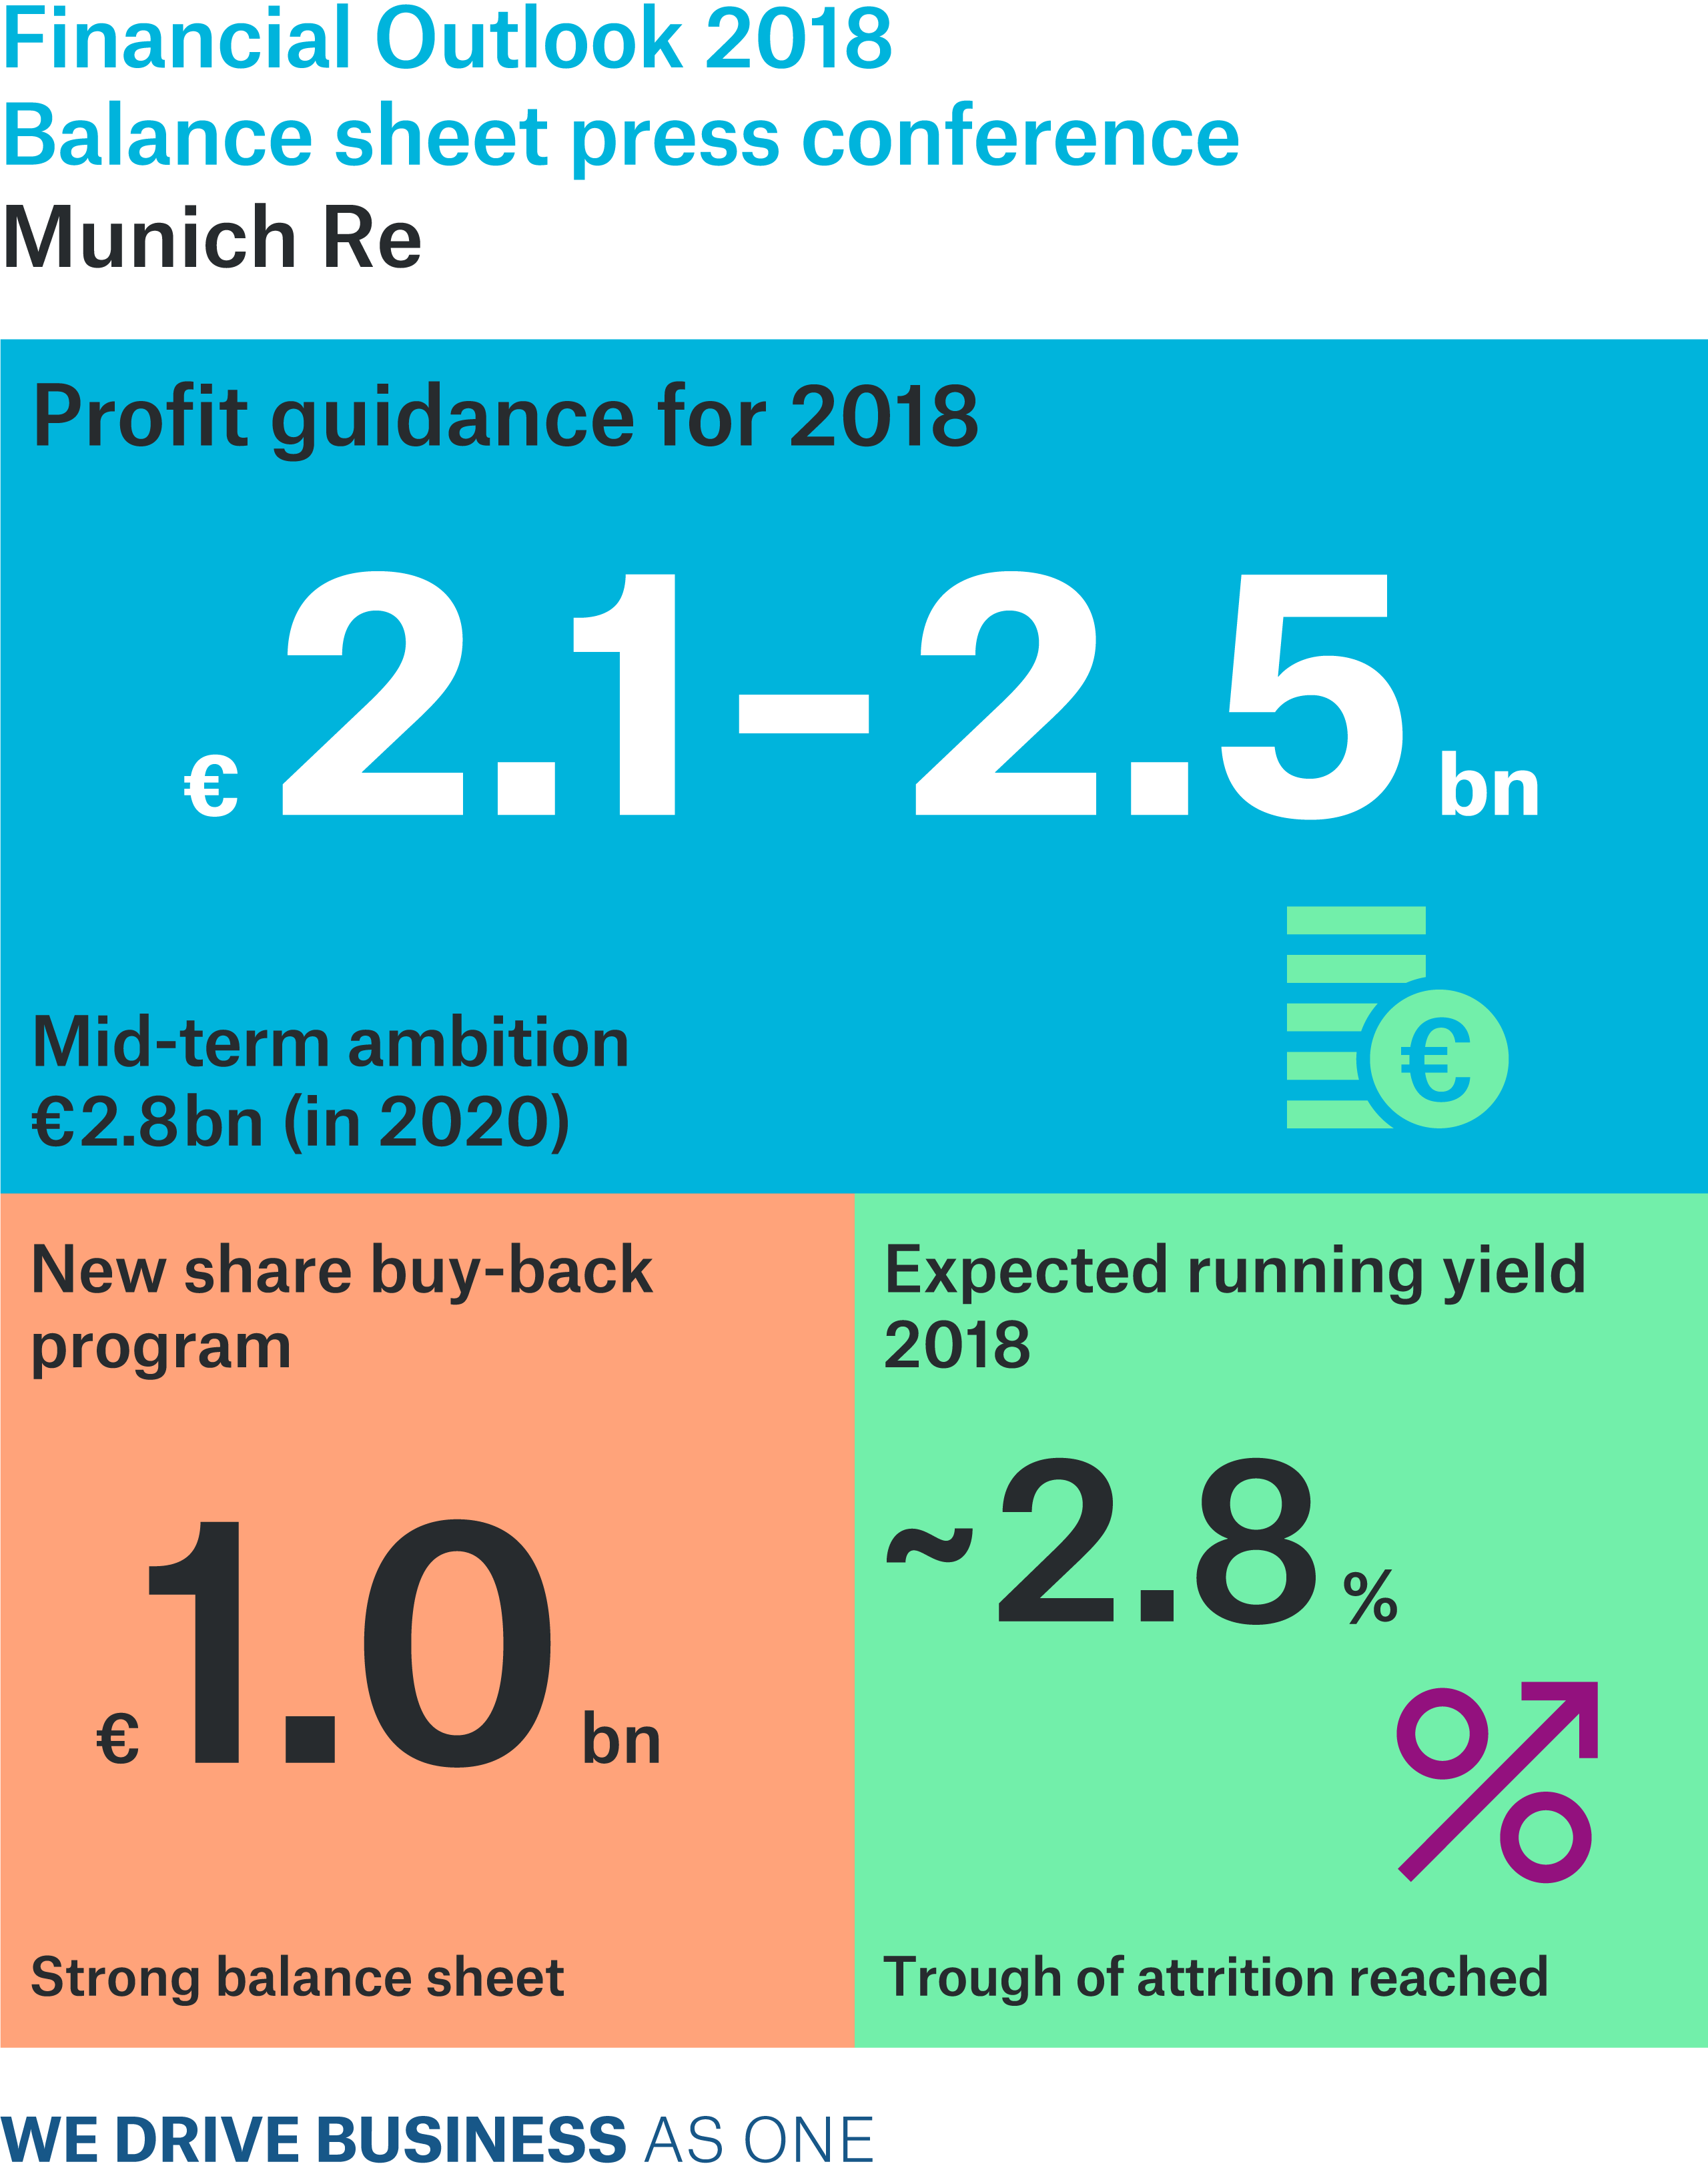 Outlook for 2018: Group target of €2.1–2.5bn